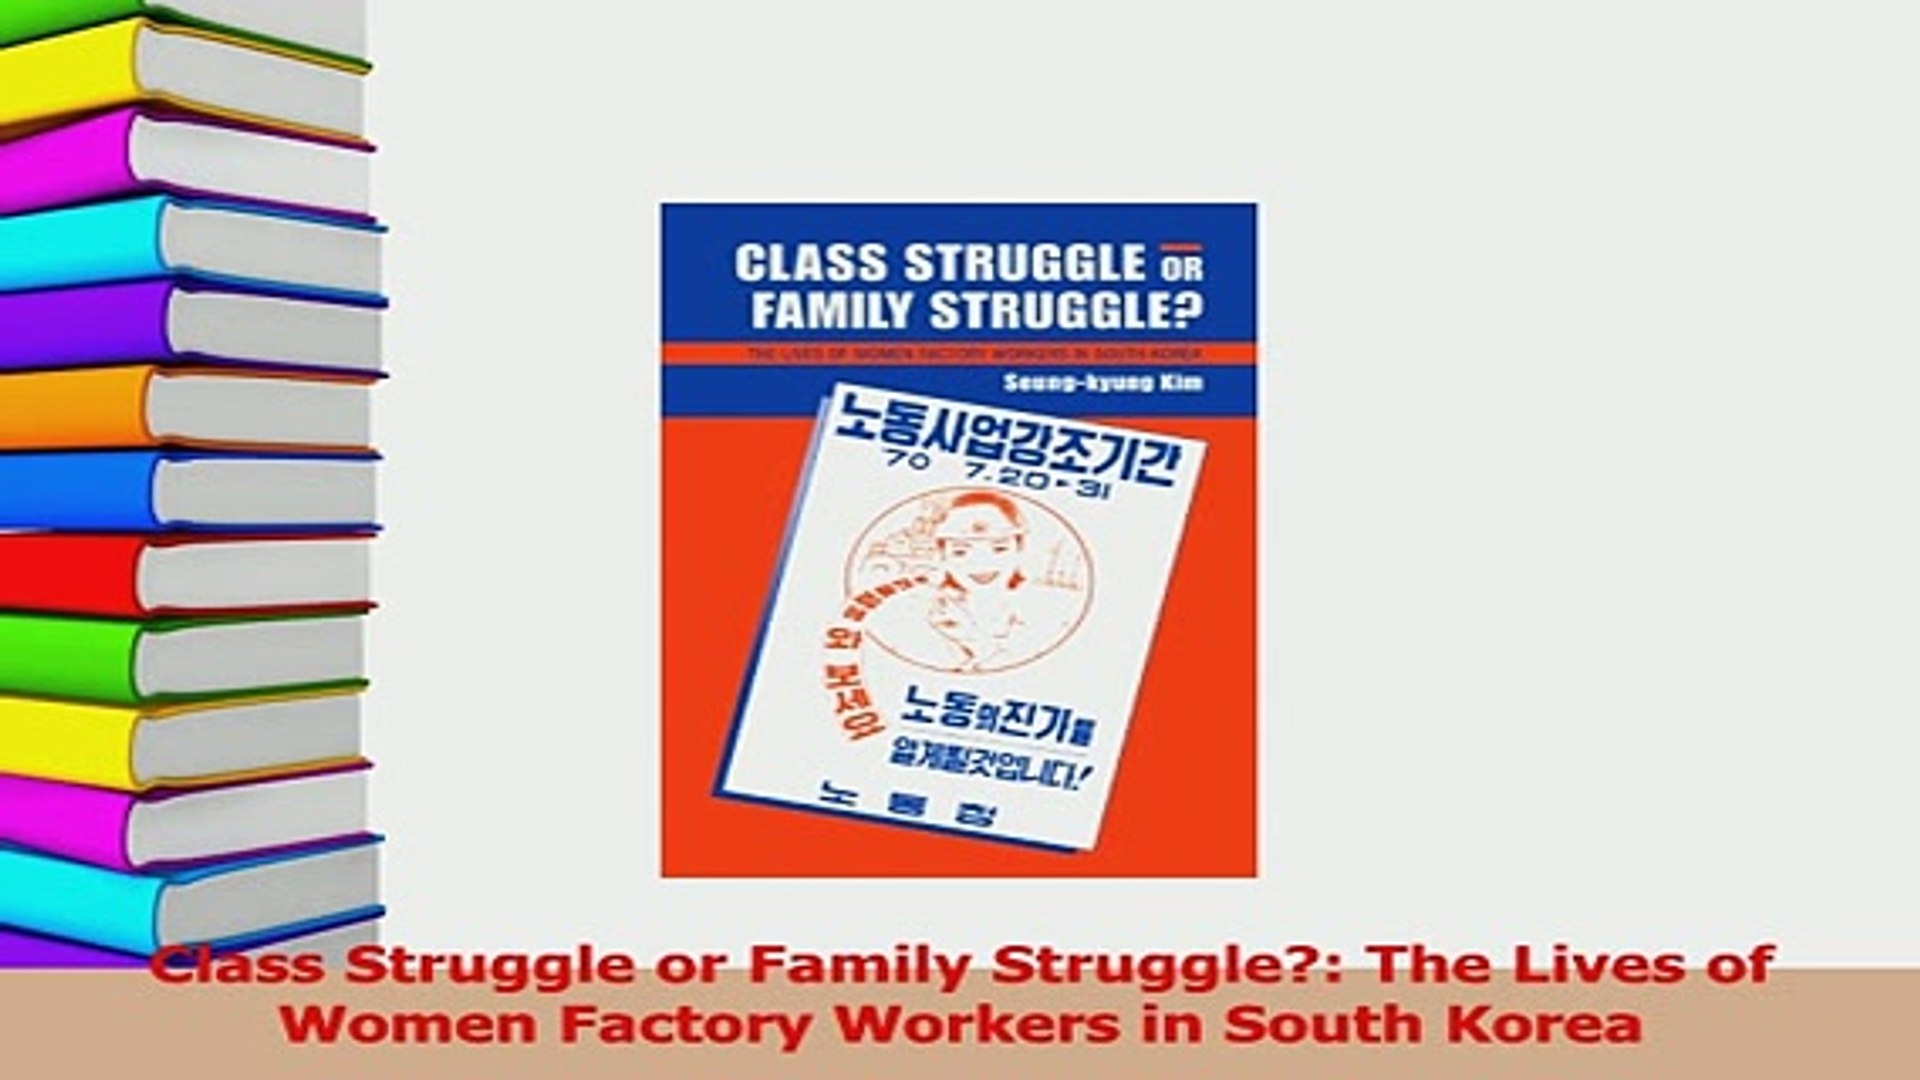 T ポイント5倍 Women Of Lives The Struggle Family Or Struggle Class Factory Korea South In Workers その他 Www Geelyoman Com